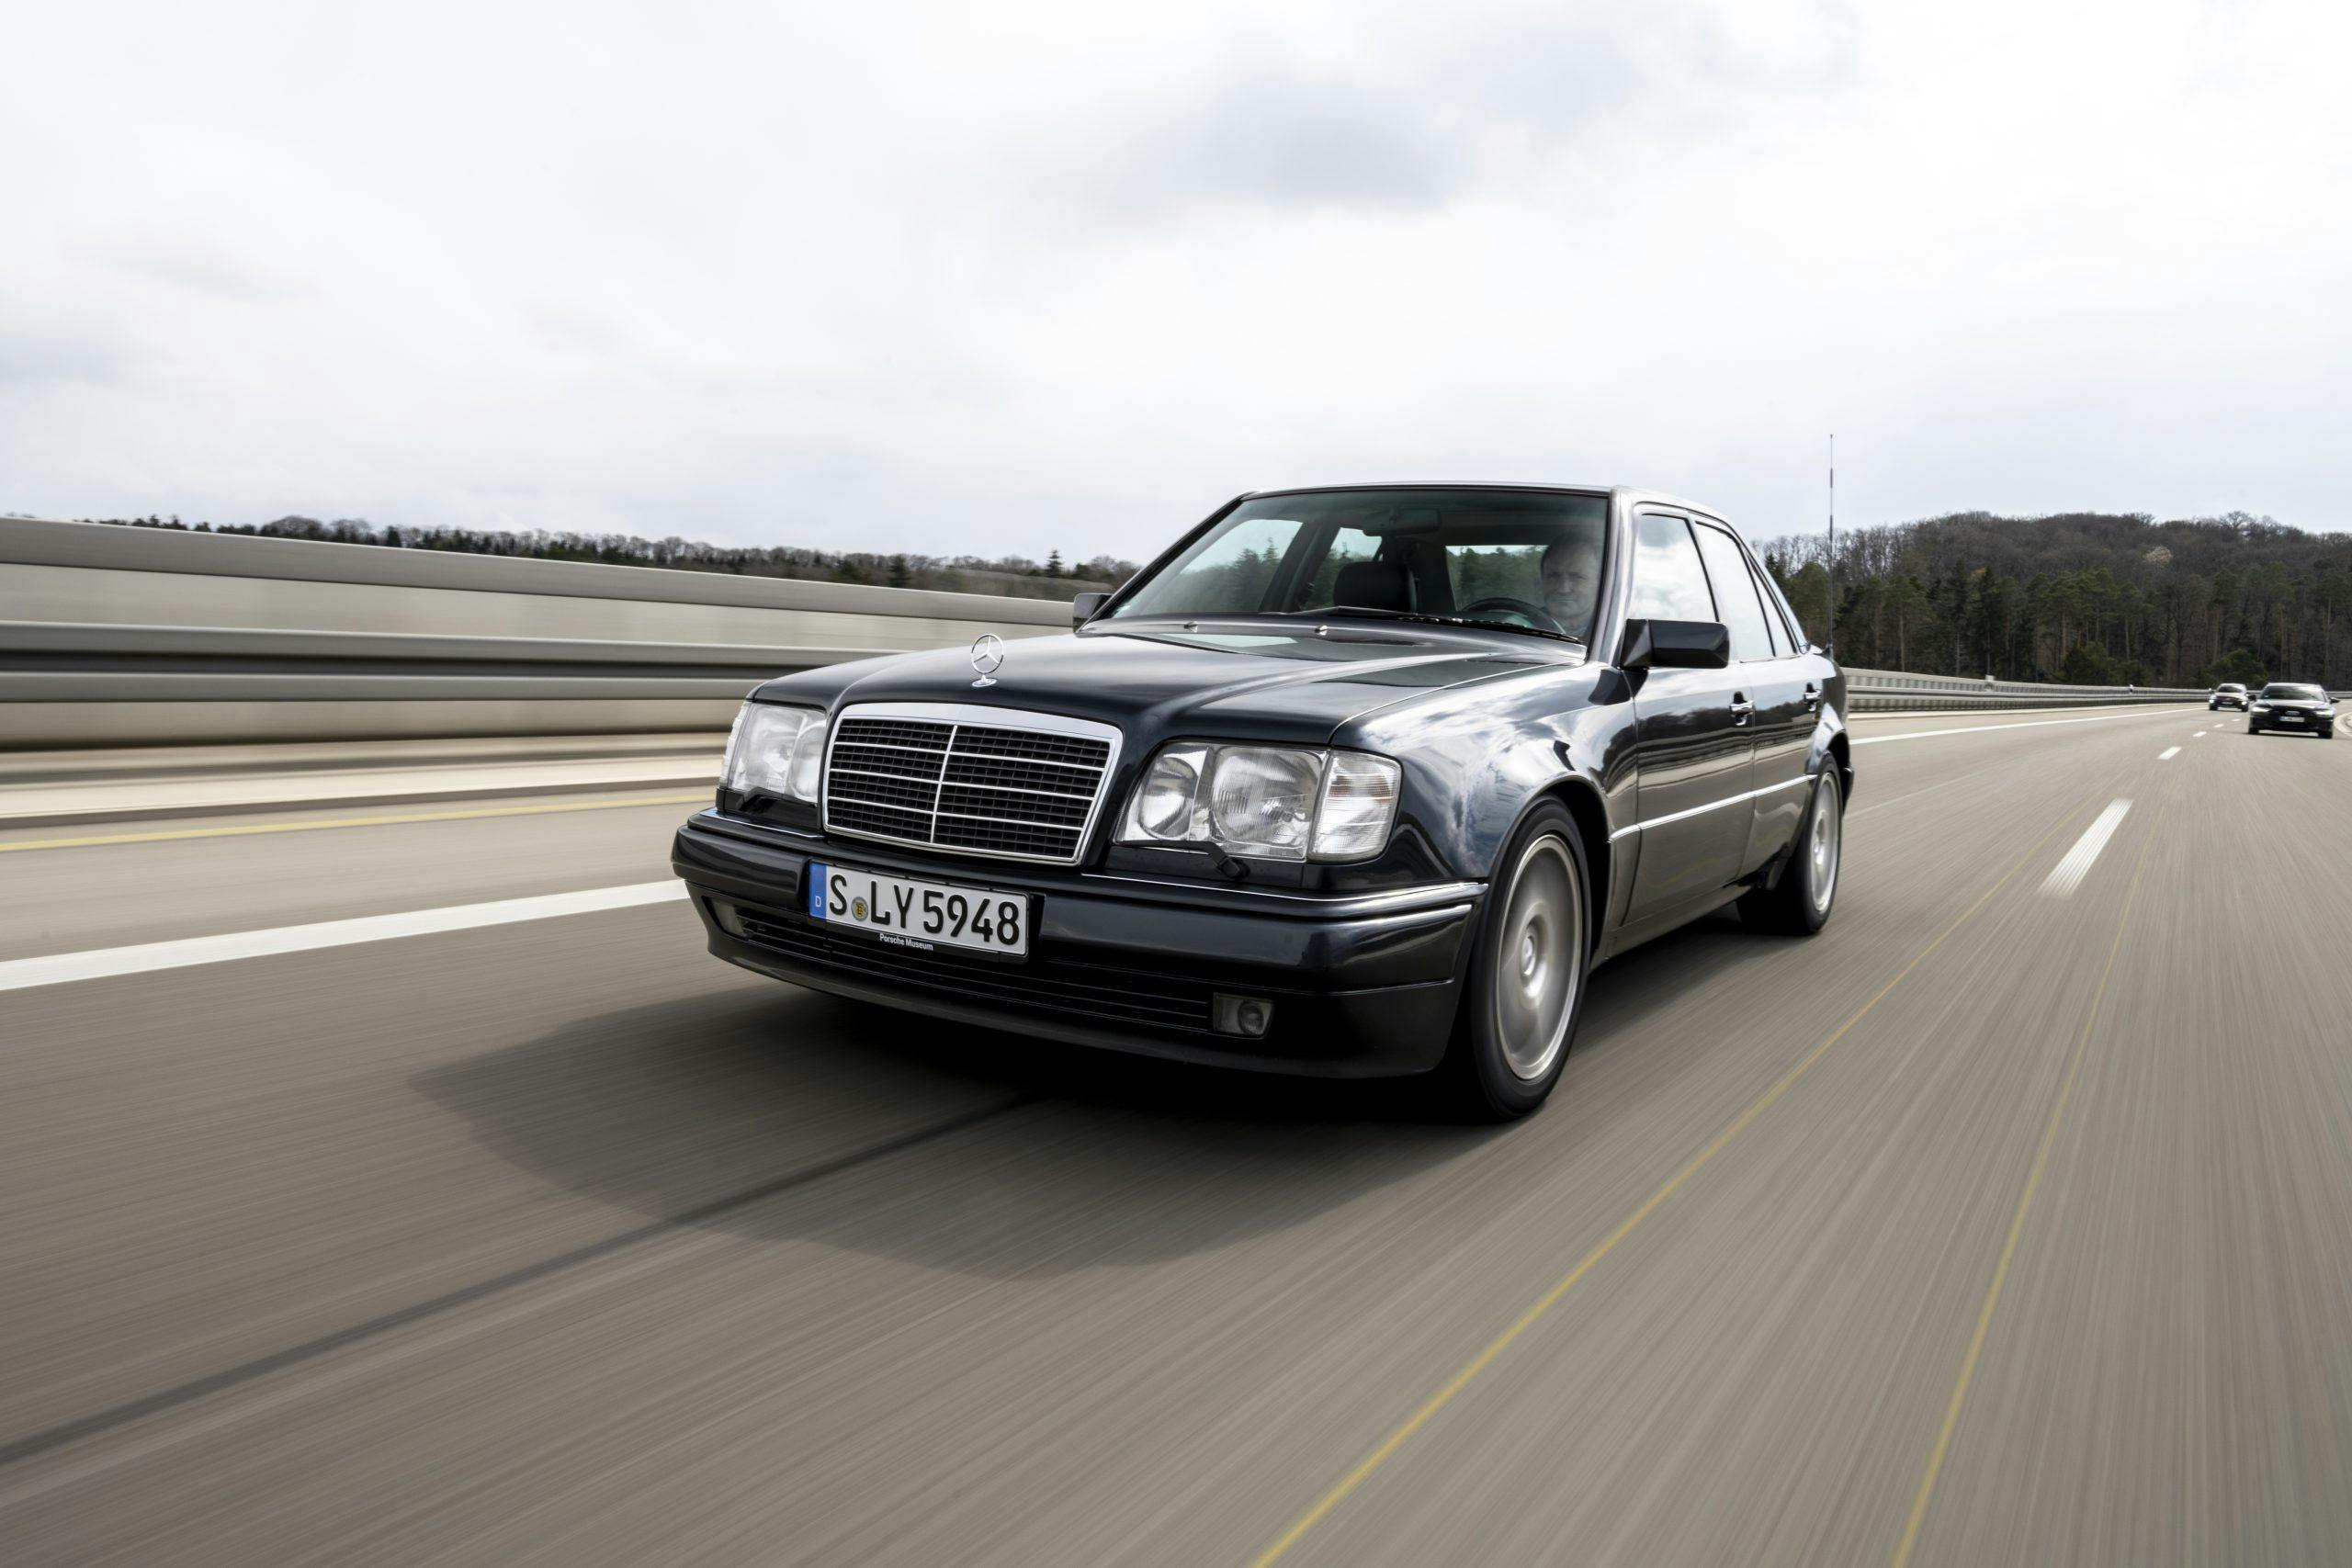 30 years on, the Mercedes-Benz 500 E proves the power of